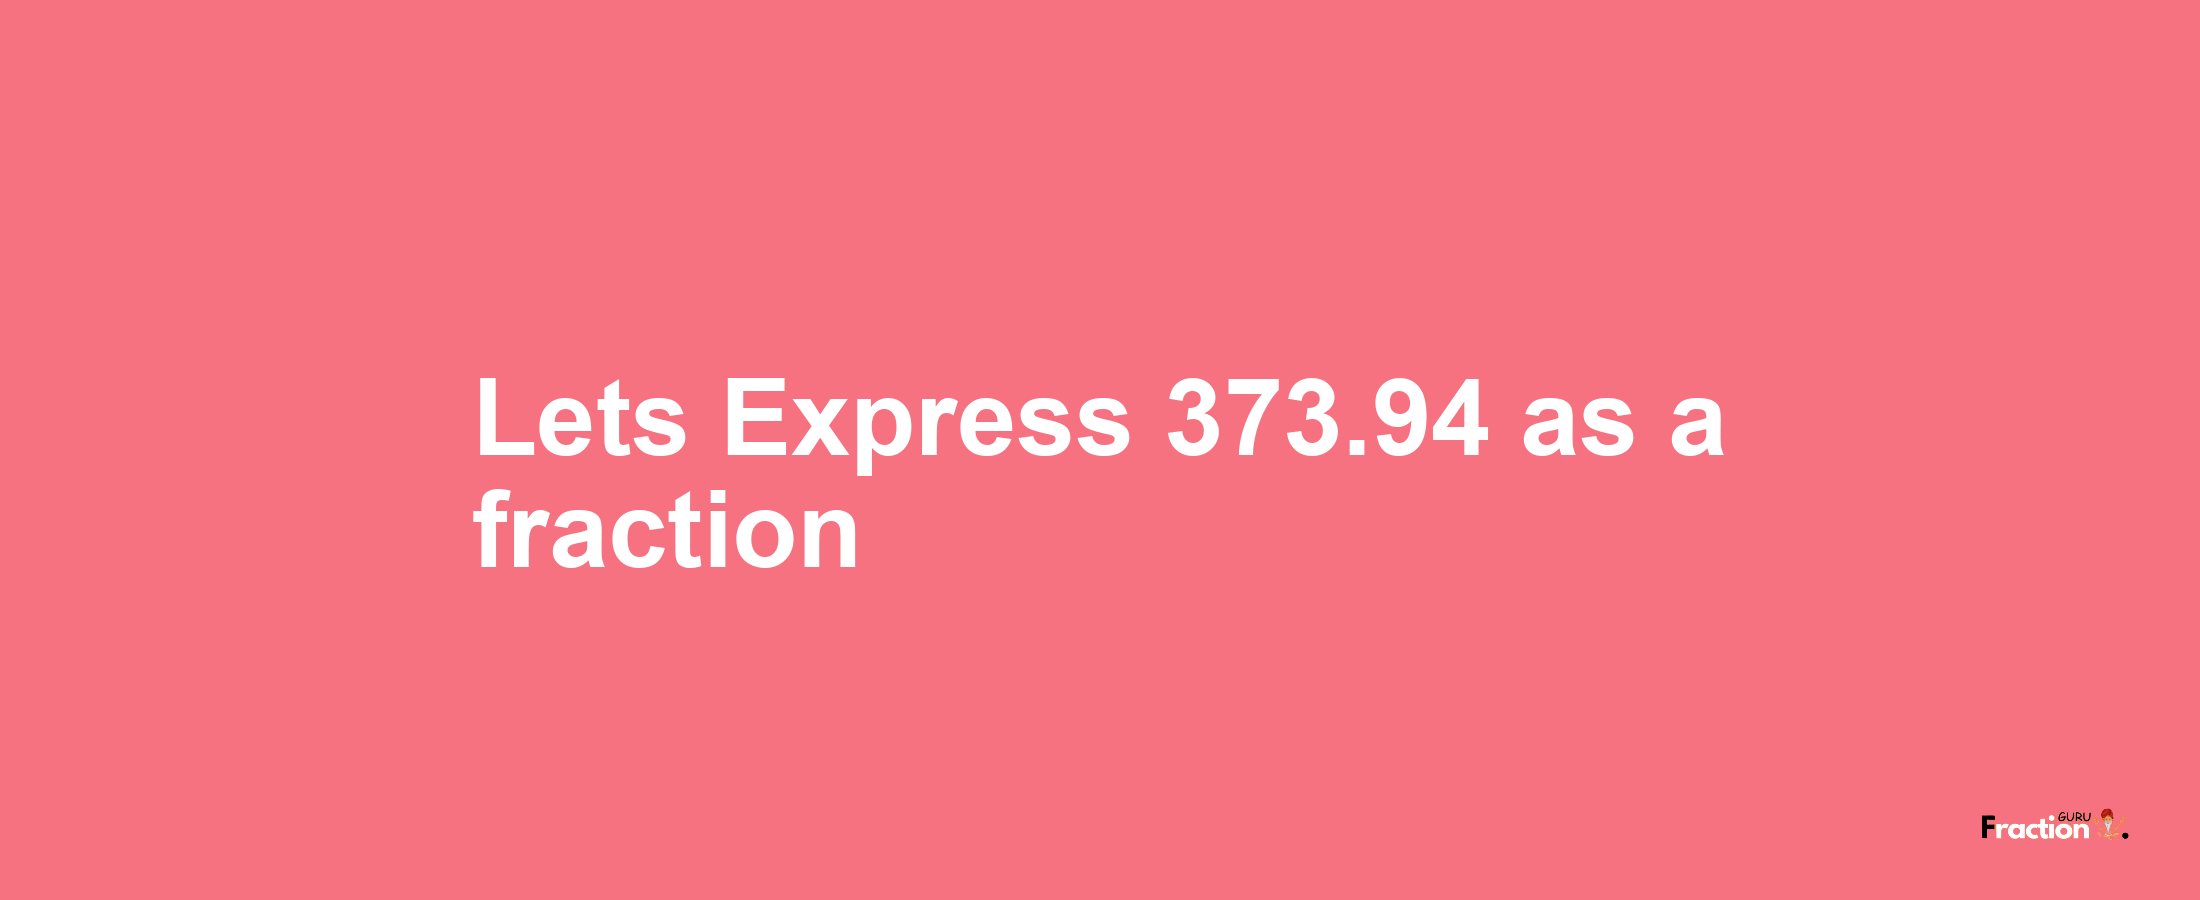 Lets Express 373.94 as afraction